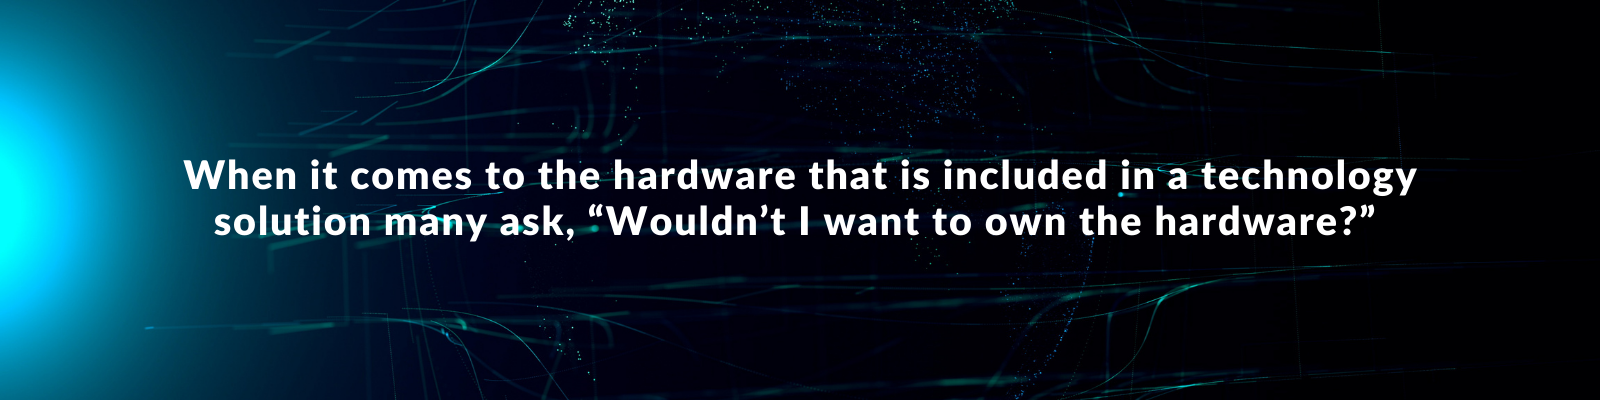 Decorative quote from the article: When it comes to the hardware that is included in a technology solution many ask, “Wouldn’t I want to own the hardware”